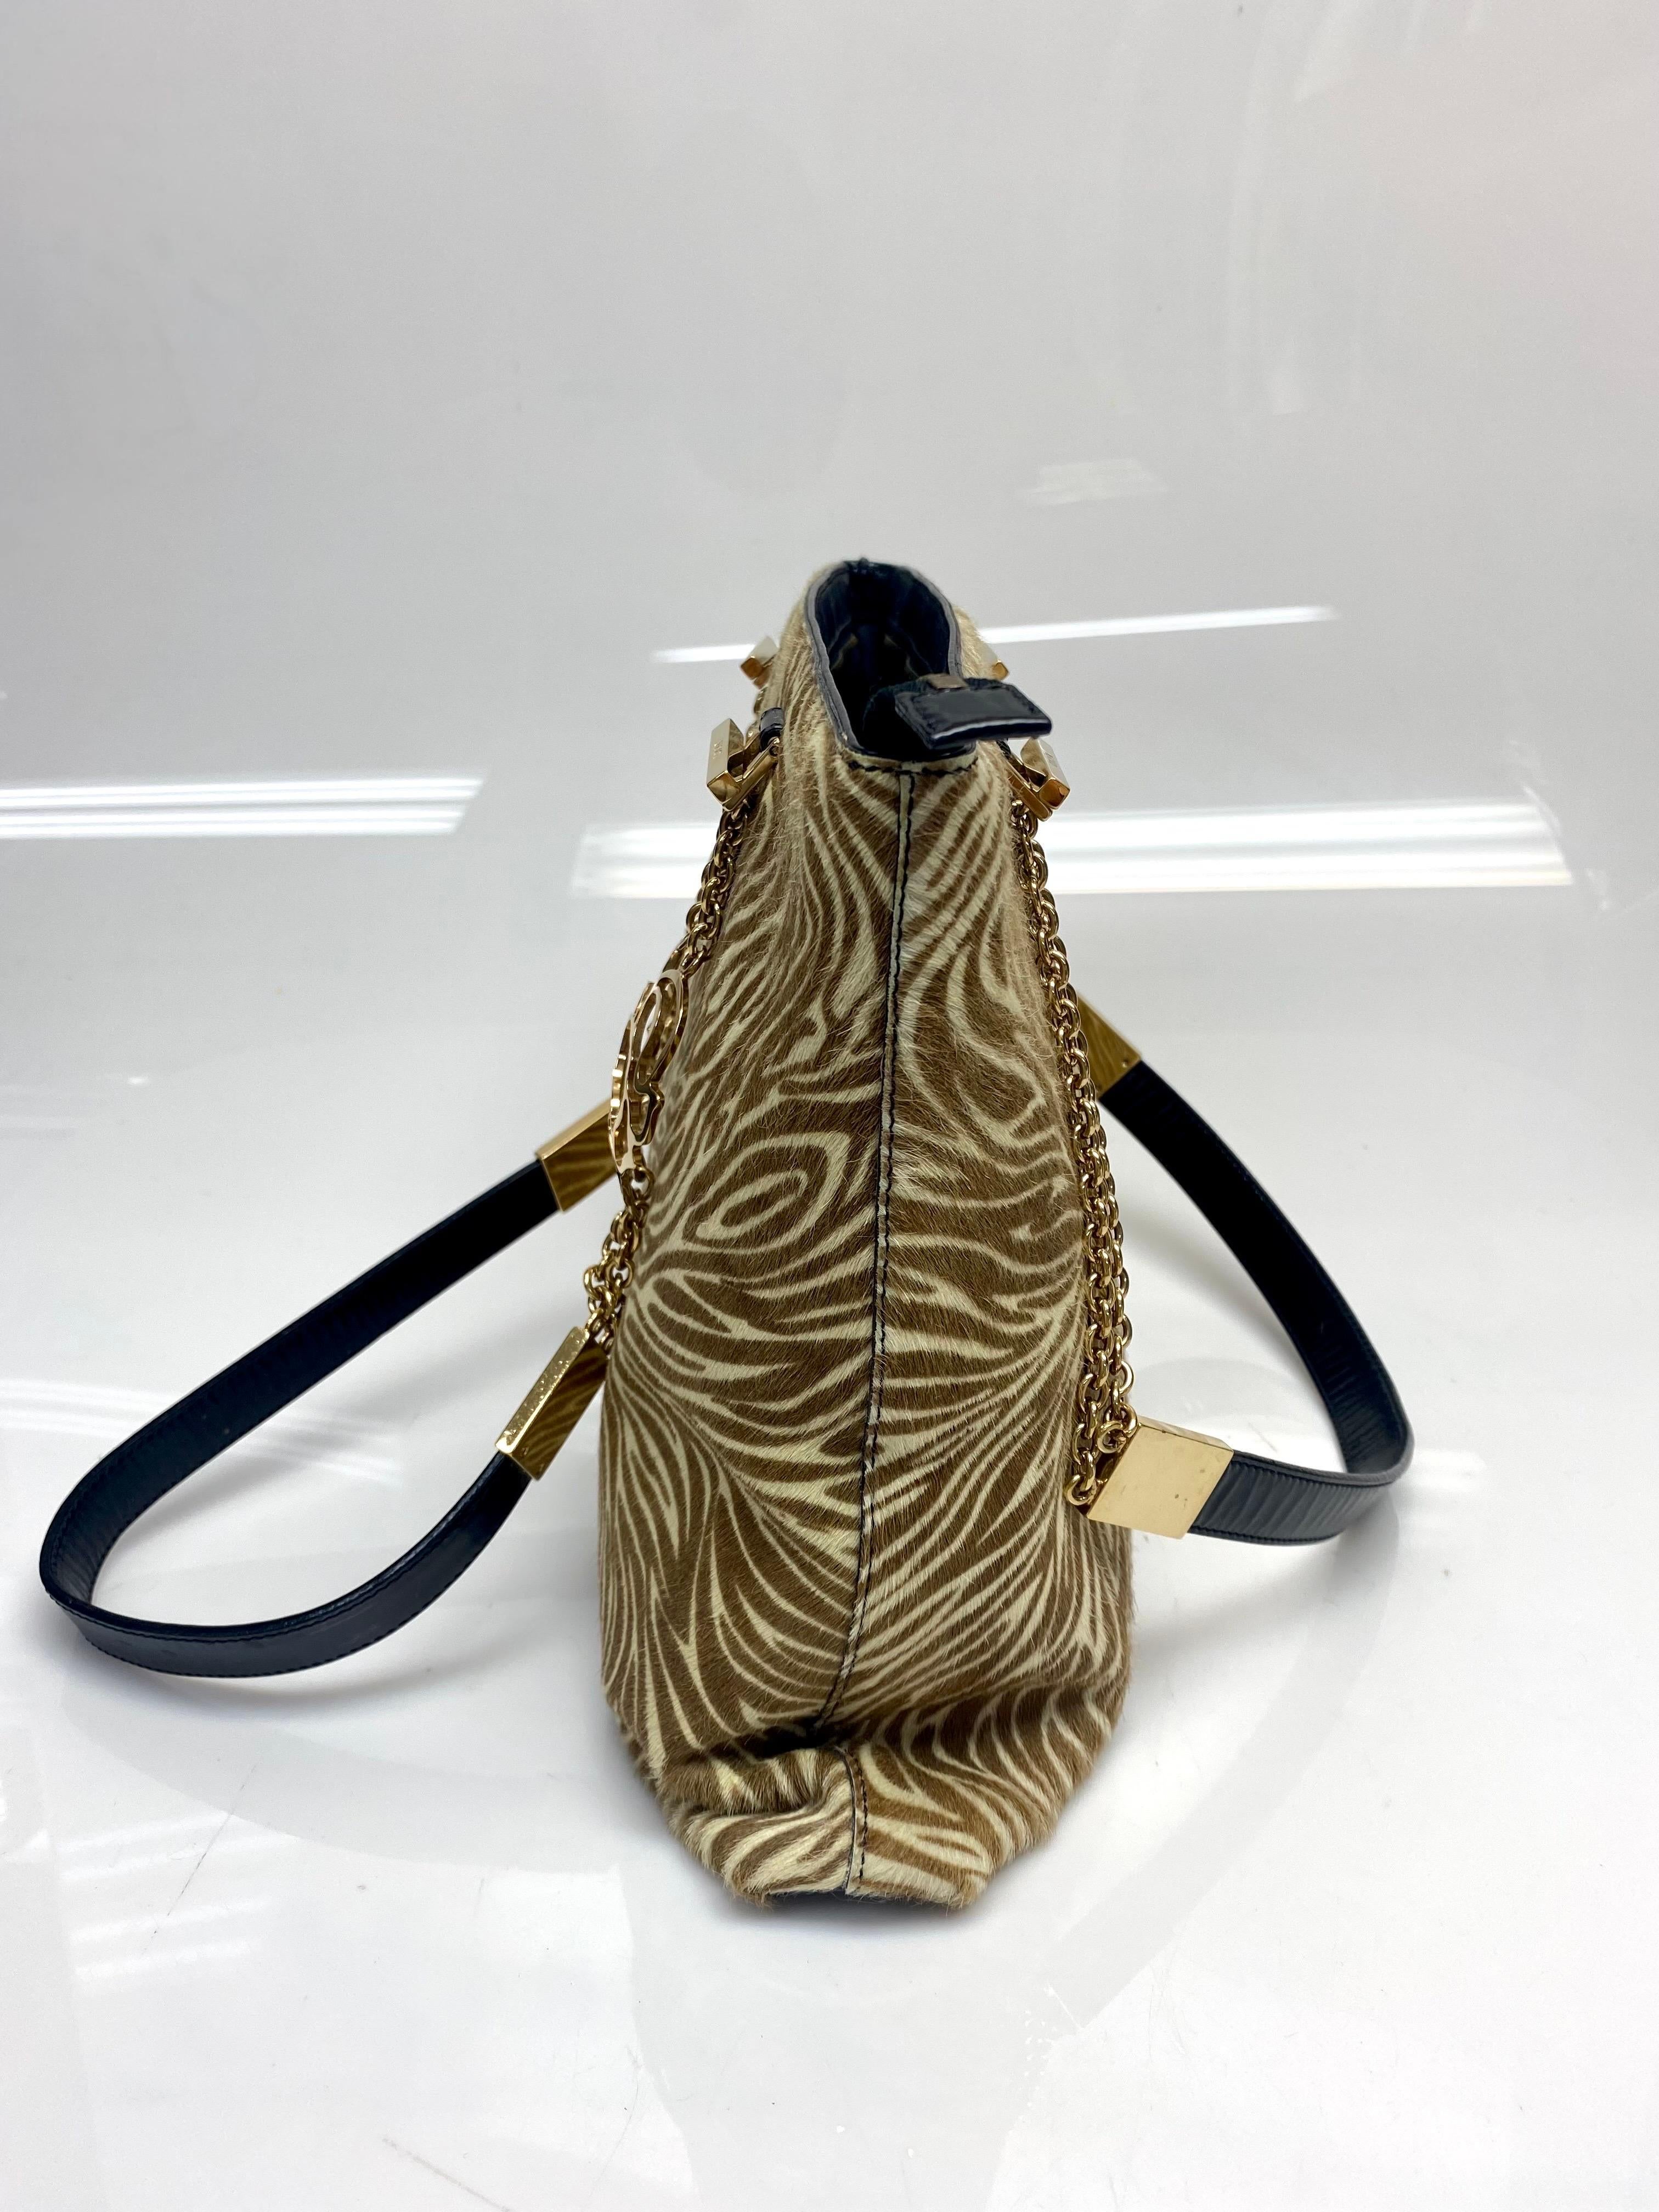 Versace Vintage Animal Print Pony Hair Shoulder Bag  In Good Condition For Sale In West Palm Beach, FL